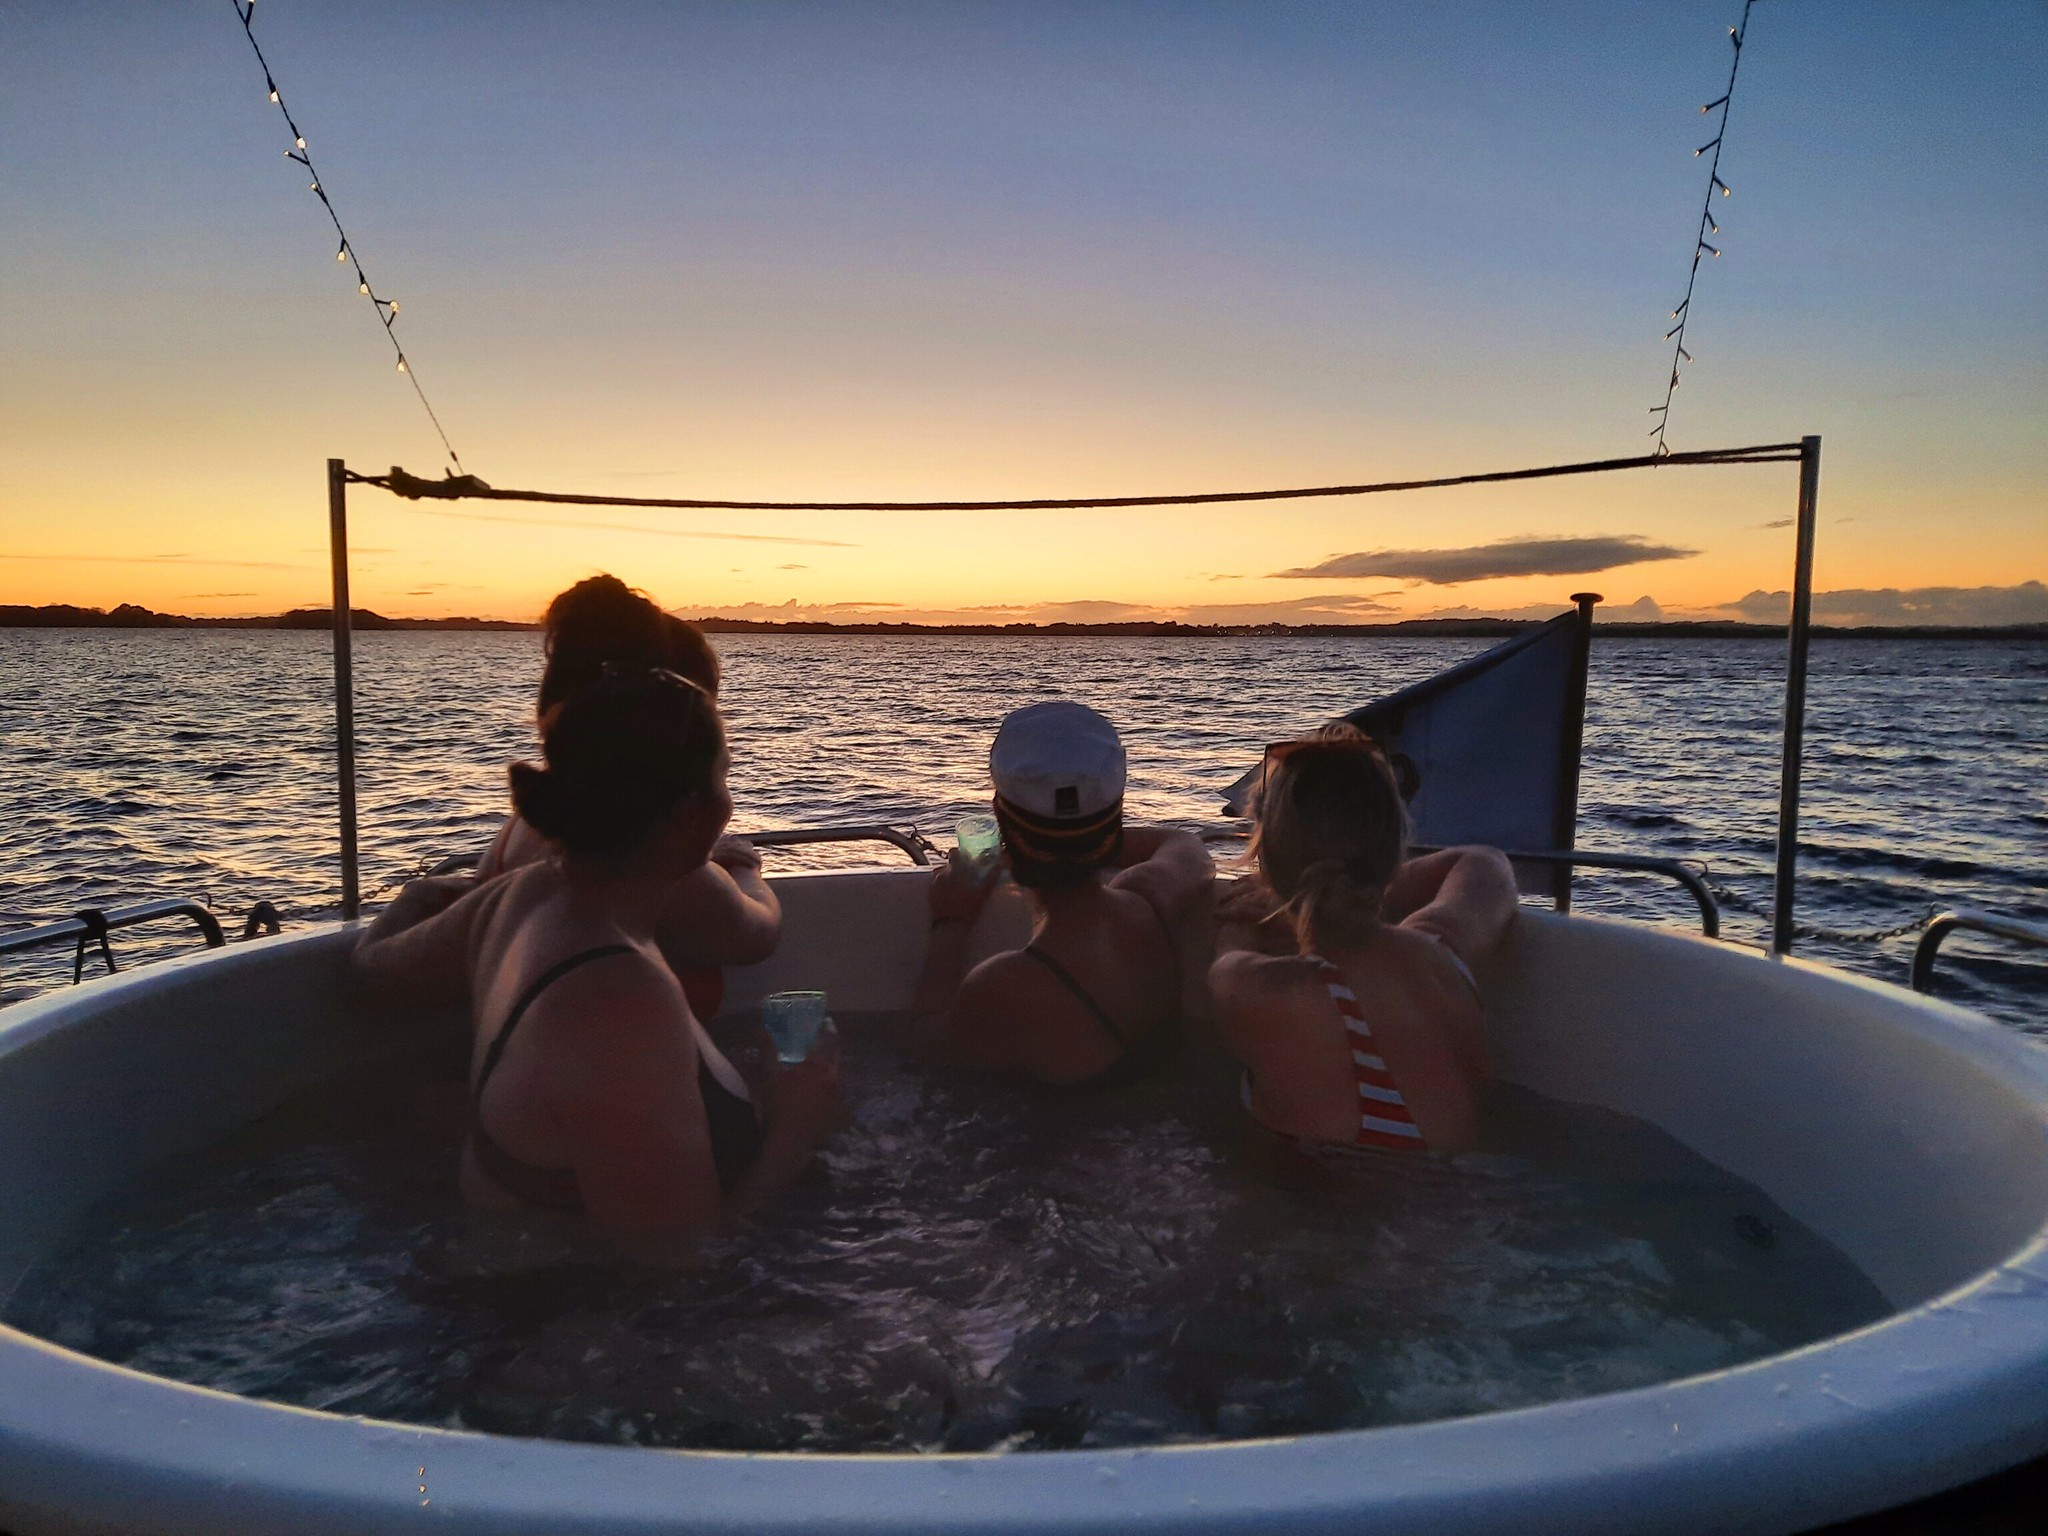 Customers Enjoying themselves on the Hot Tub Boat